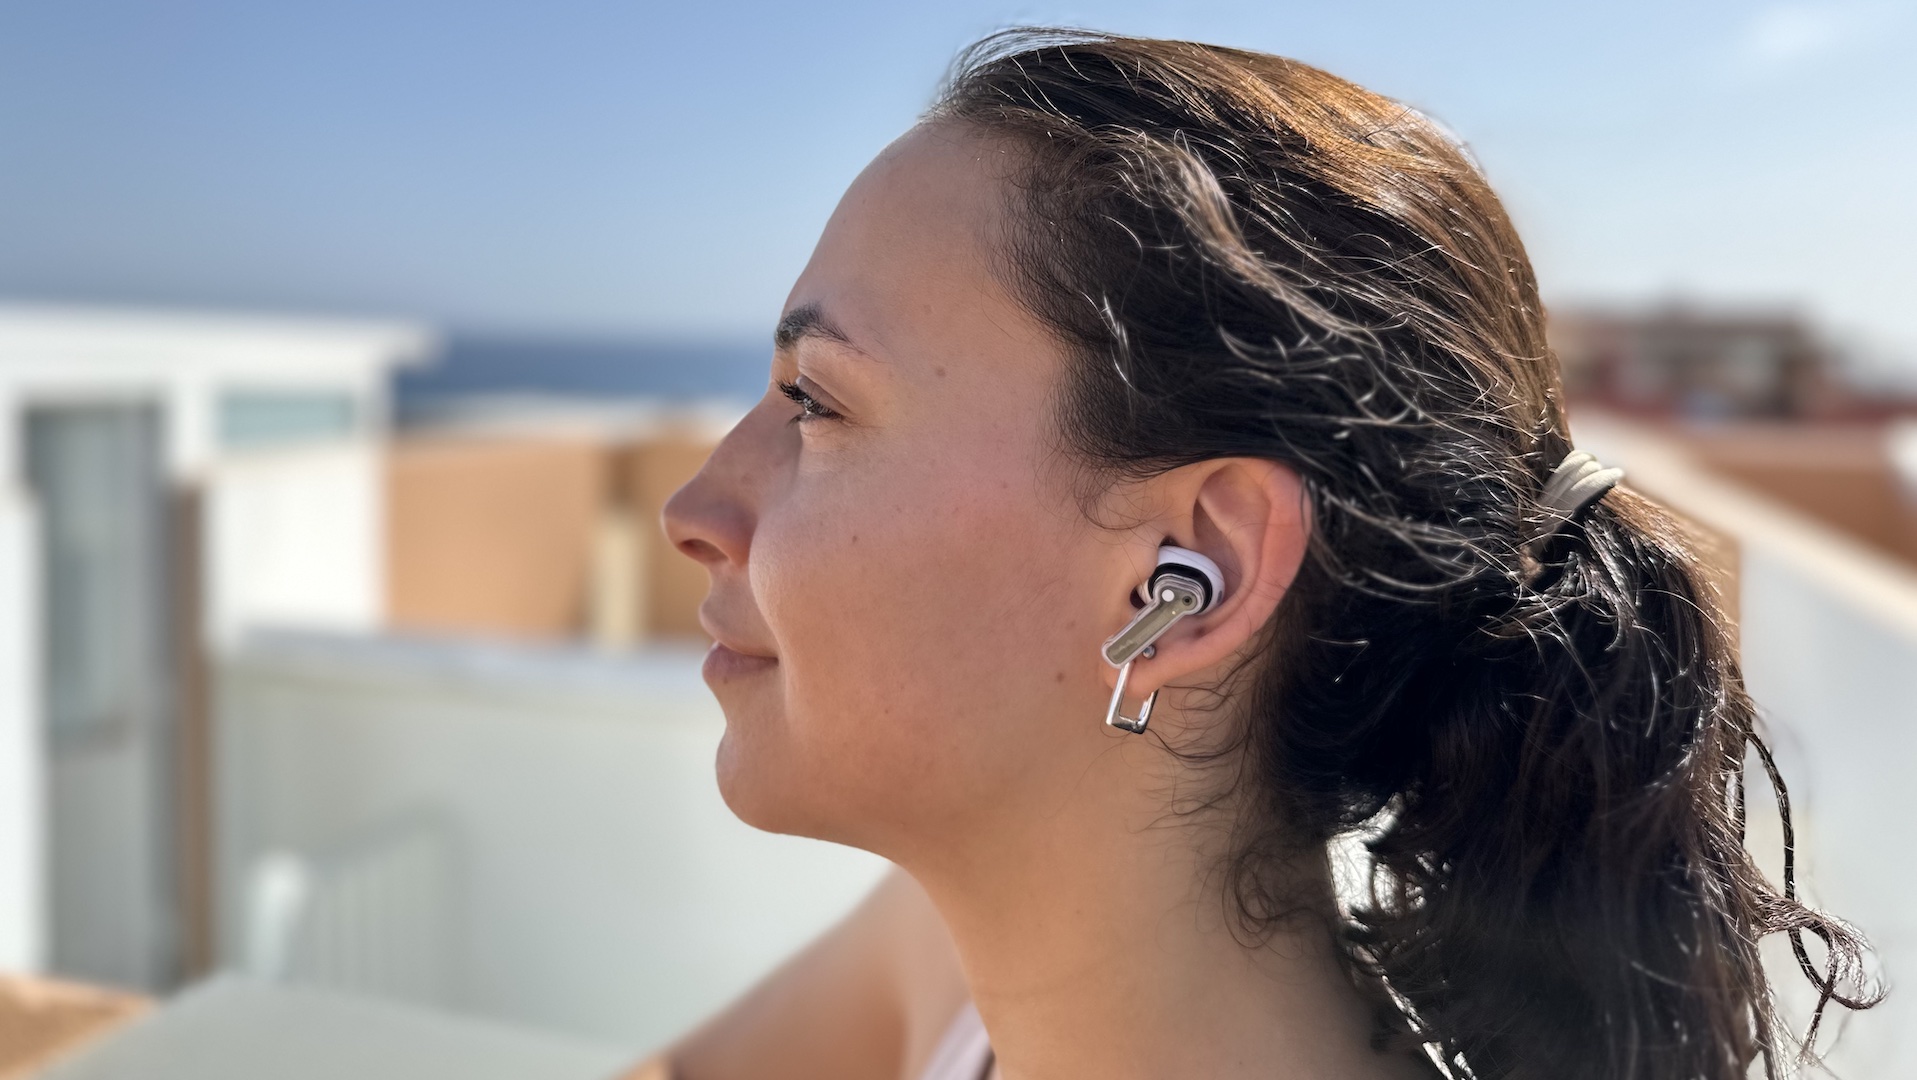 Nothing Ear 1 review: funky, semi-transparent earbuds worth a